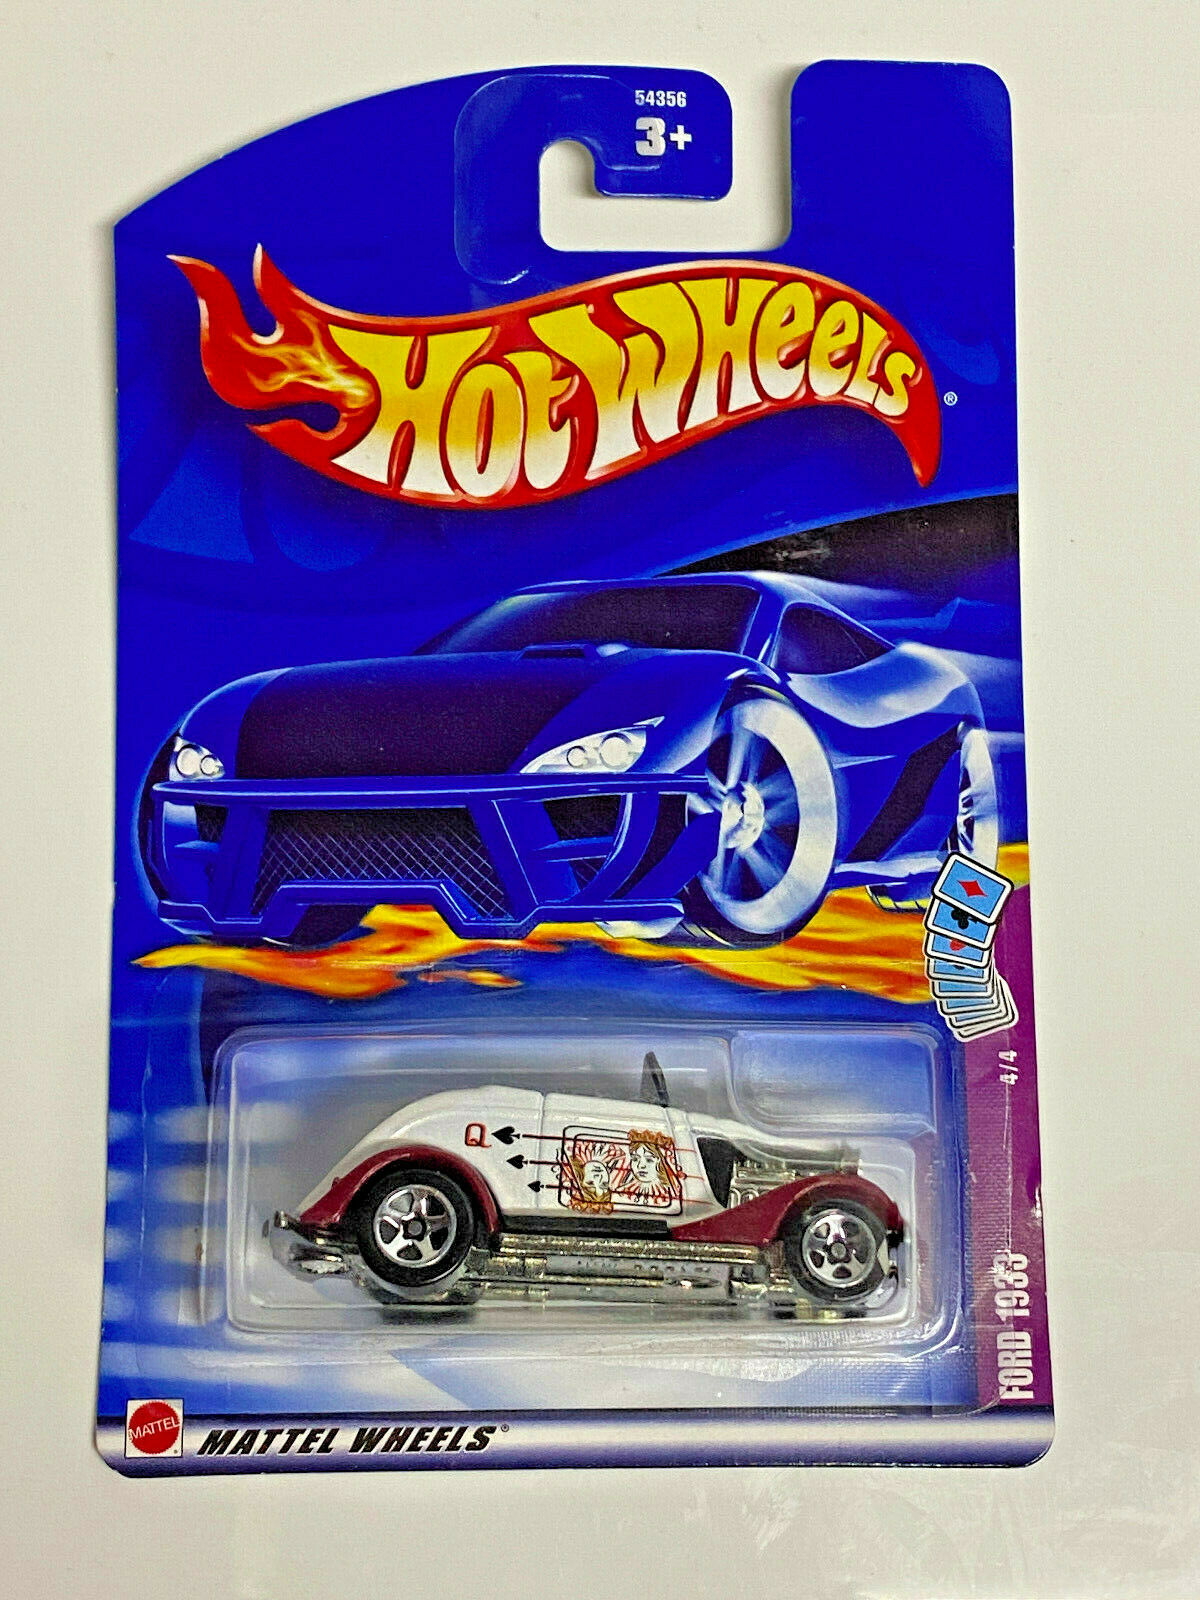 2002 Hot Wheels Wild Aces Full Set of 4 NIP Collector #071,#072,#073,#074